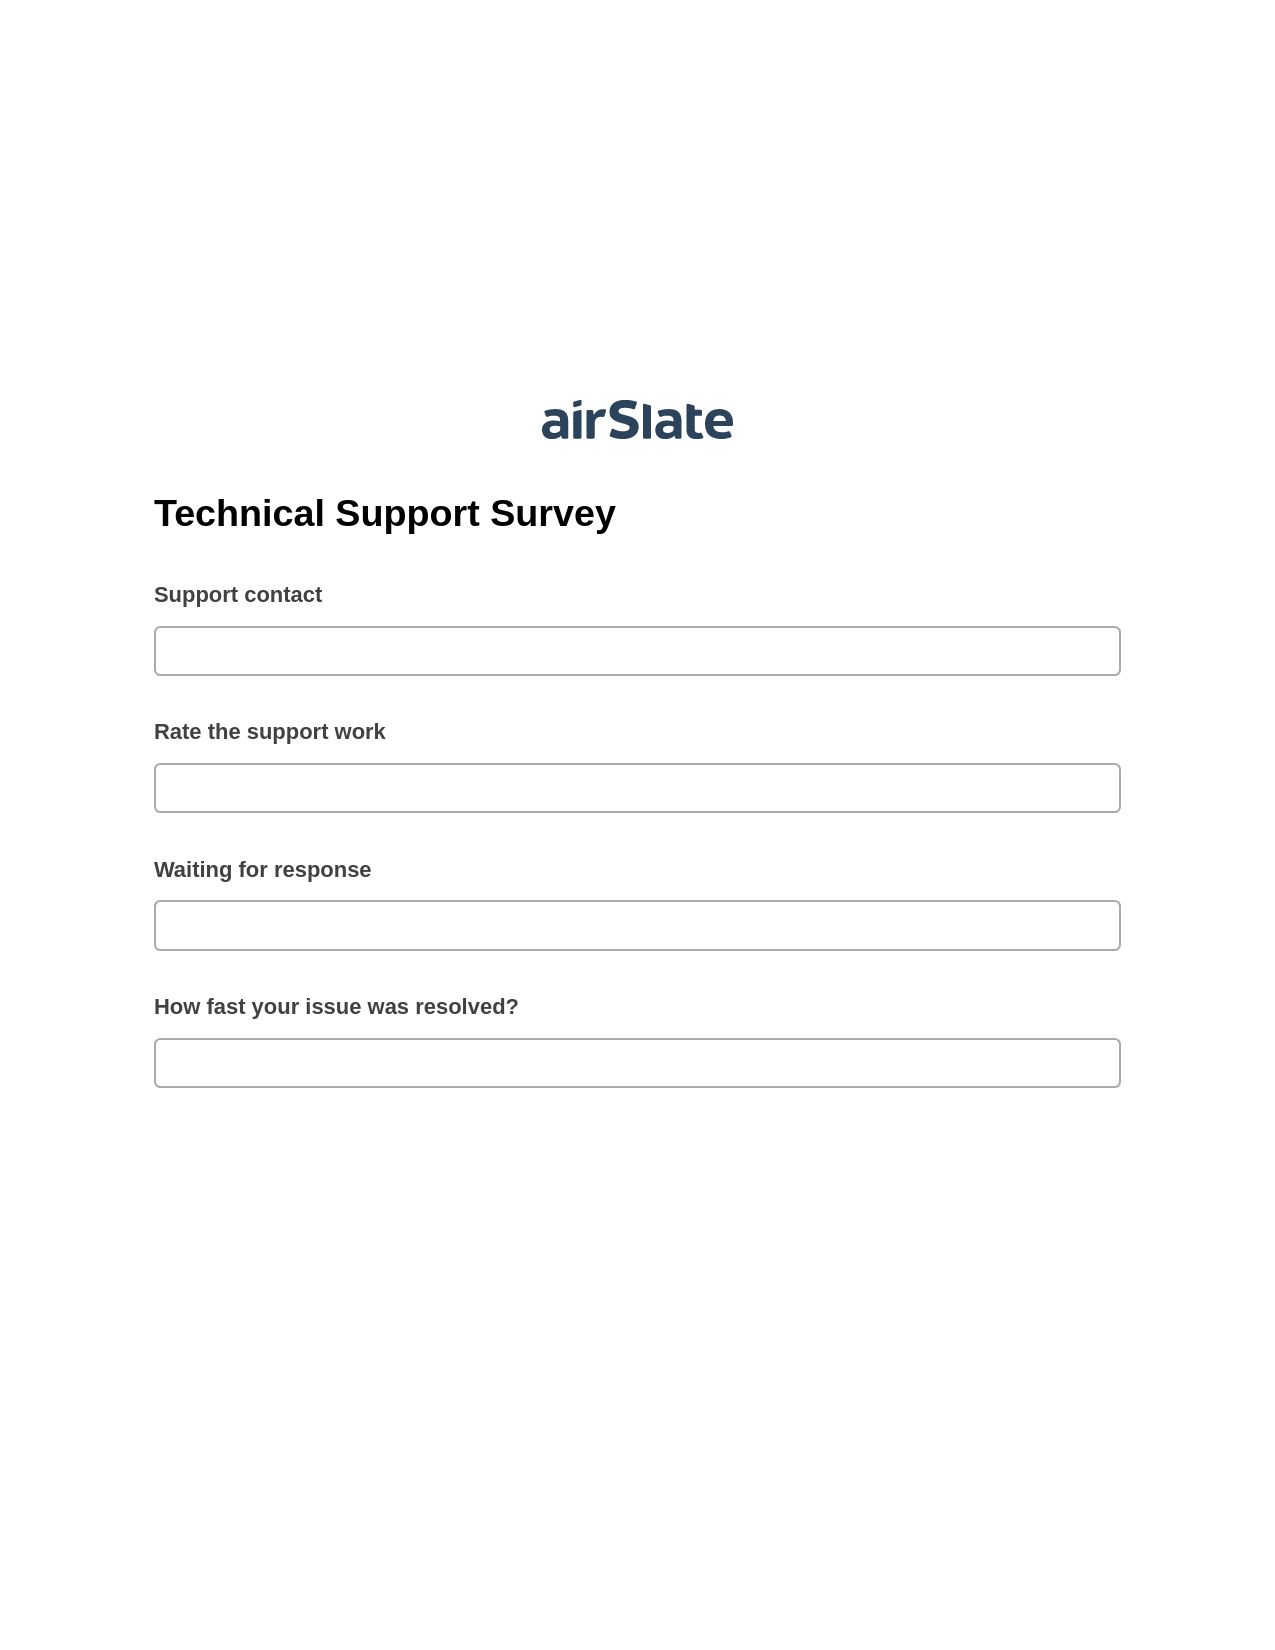 Technical Support Survey Pre-fill from Salesforce Records Bot, Google Calendar Bot, Export to Excel 365 Bot